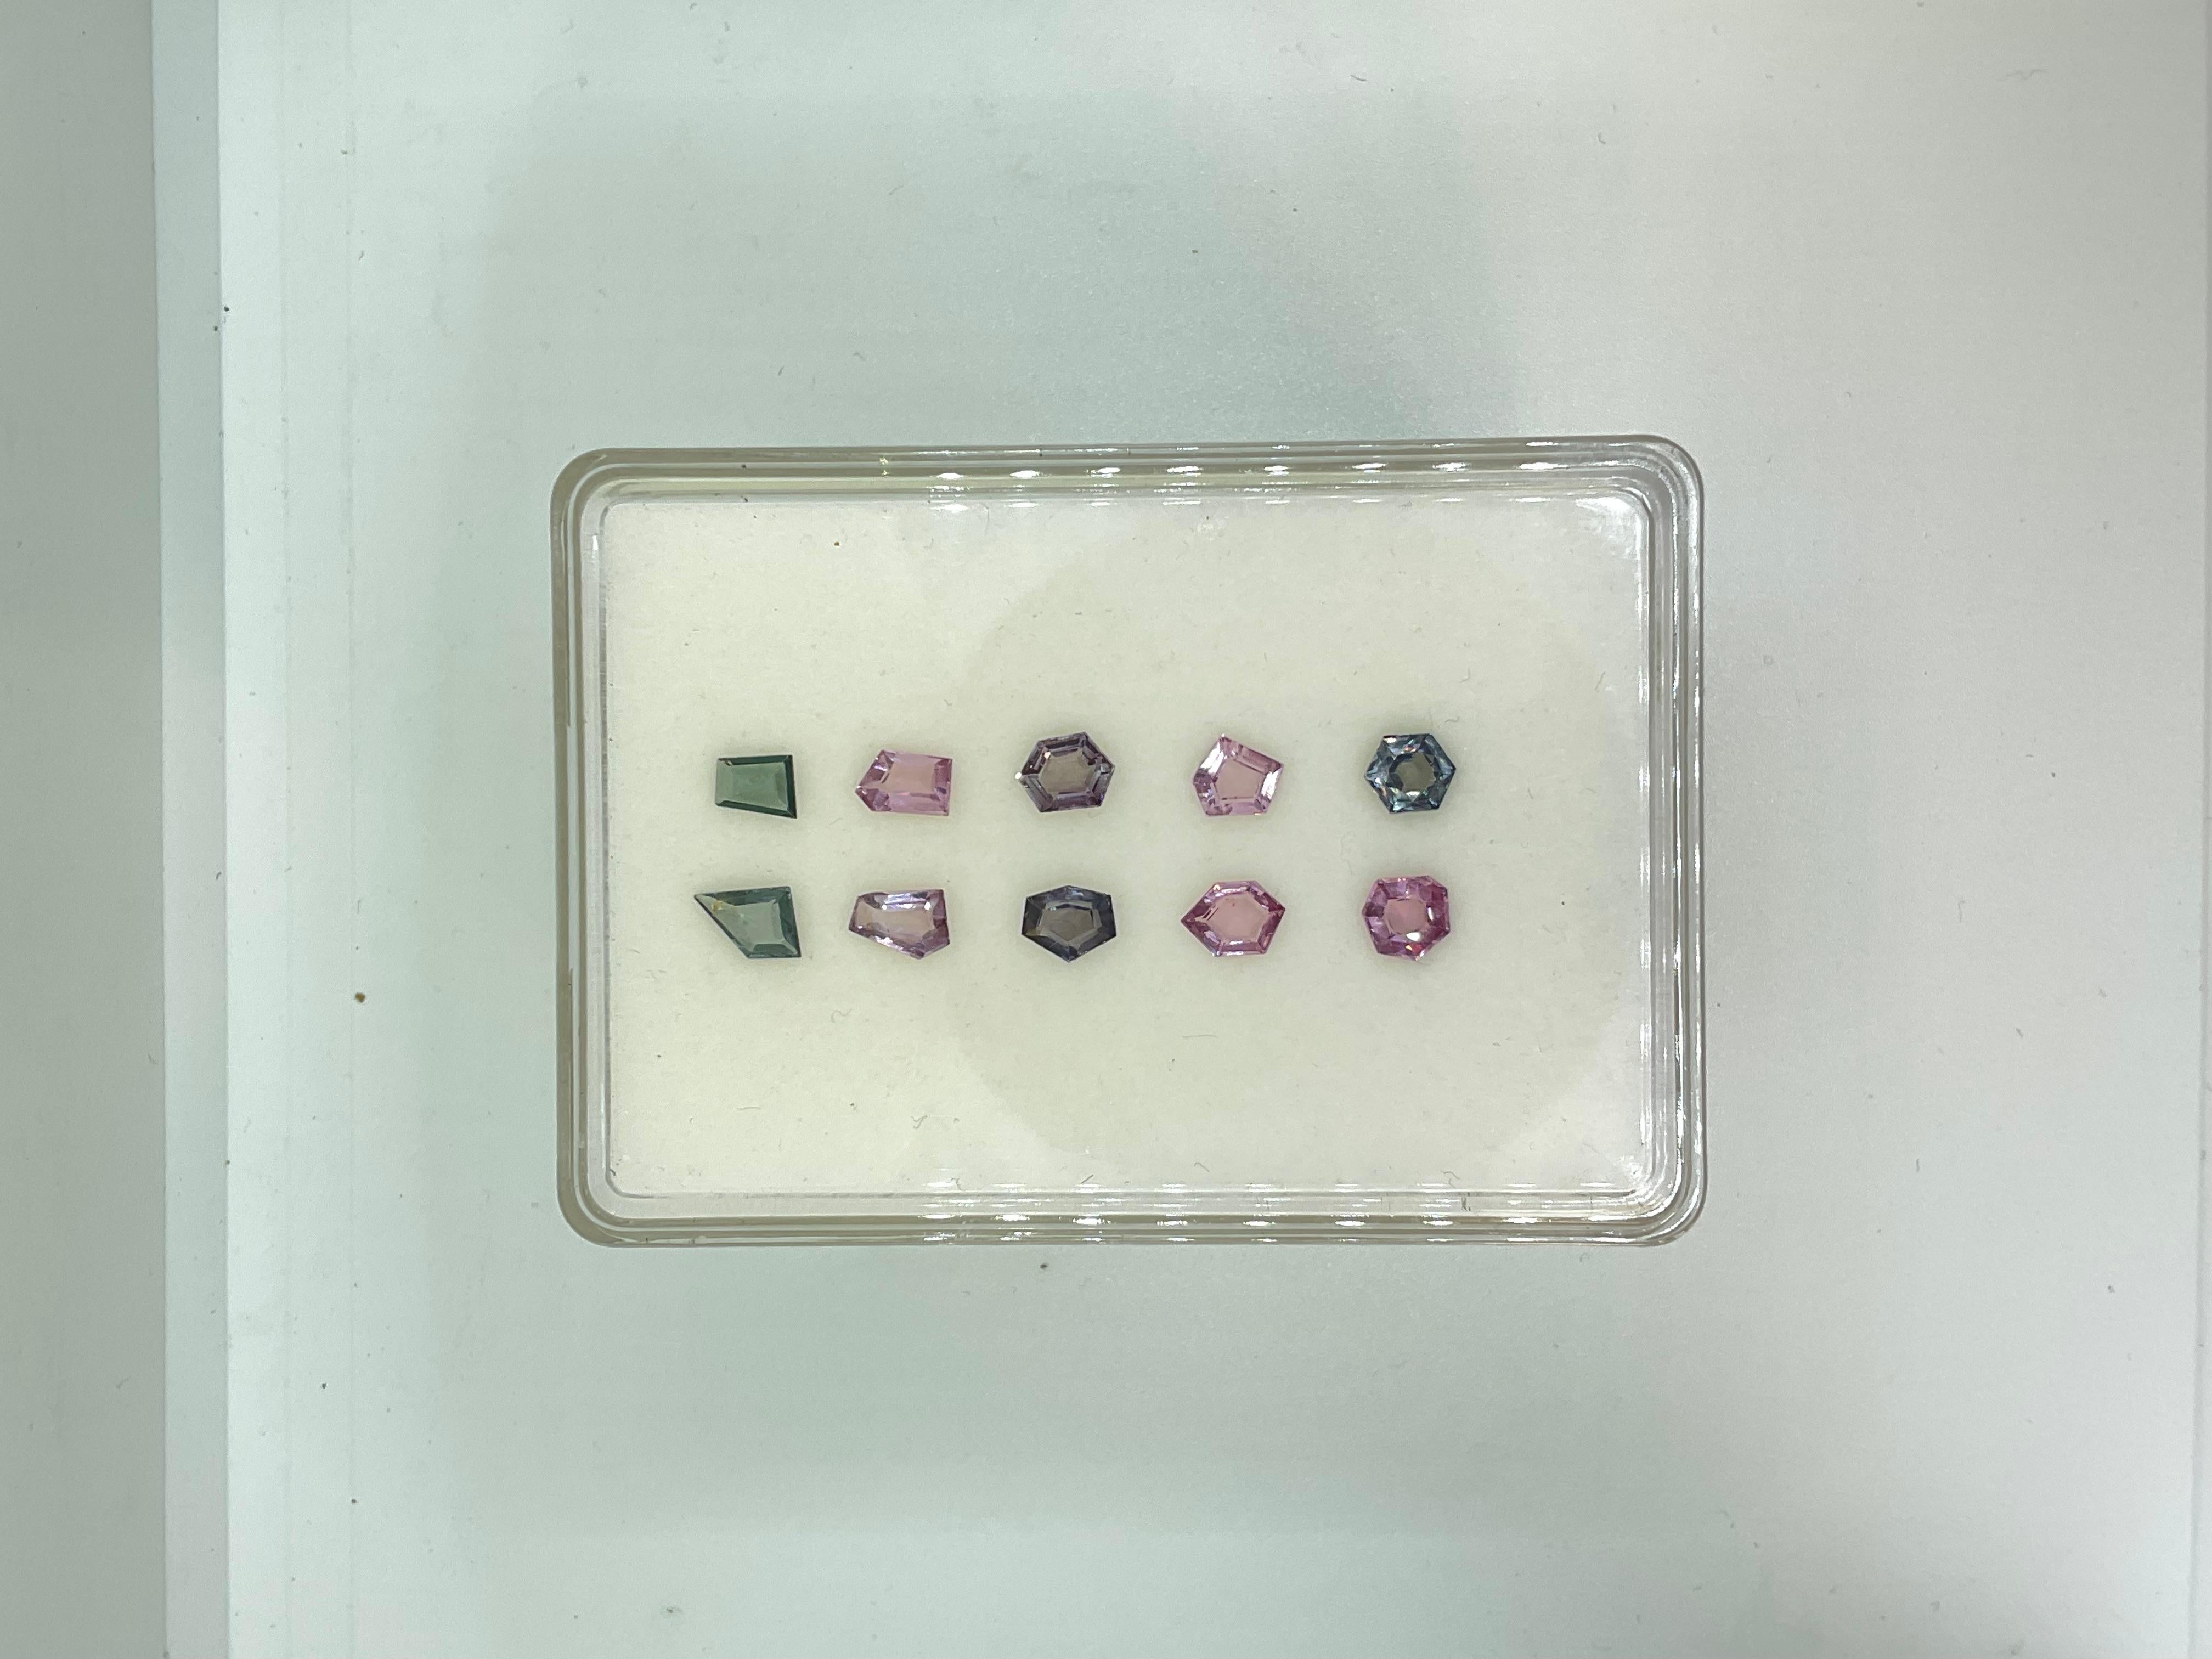 8.30 Carats Grey & Pink Spinel Fancy Cut Stone Natural Gem For Top Fine Jewelry

Gemstone: Spinel
Weight: 8.30 Carats
Size: 4x5 To 7x5 MM
Pieces: 10
Shape: Fancy Cut stones